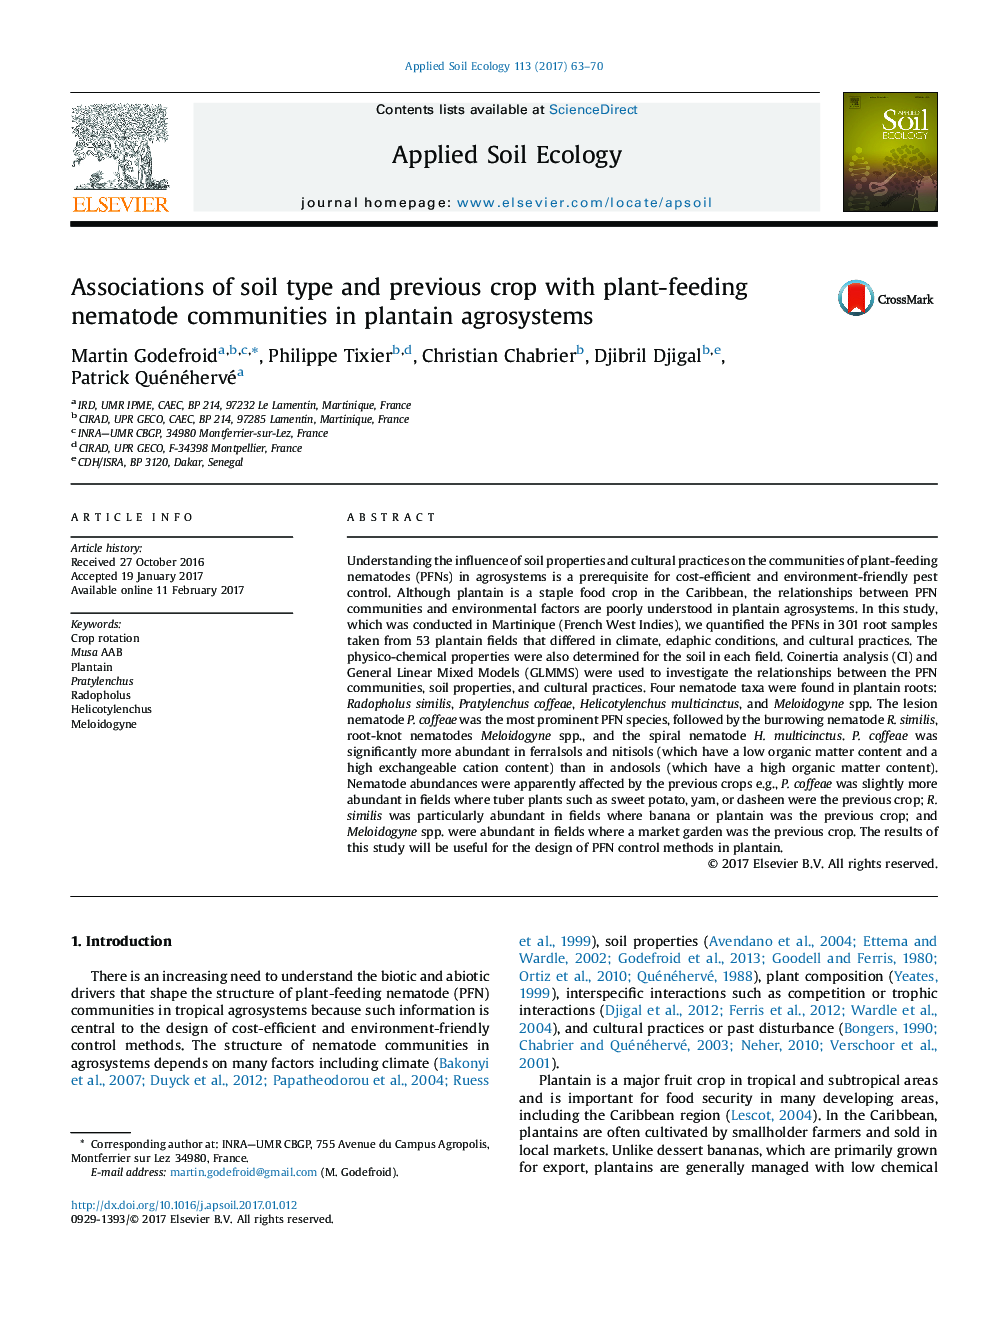 Associations of soil type and previous crop with plant-feeding nematode communities in plantain agrosystems